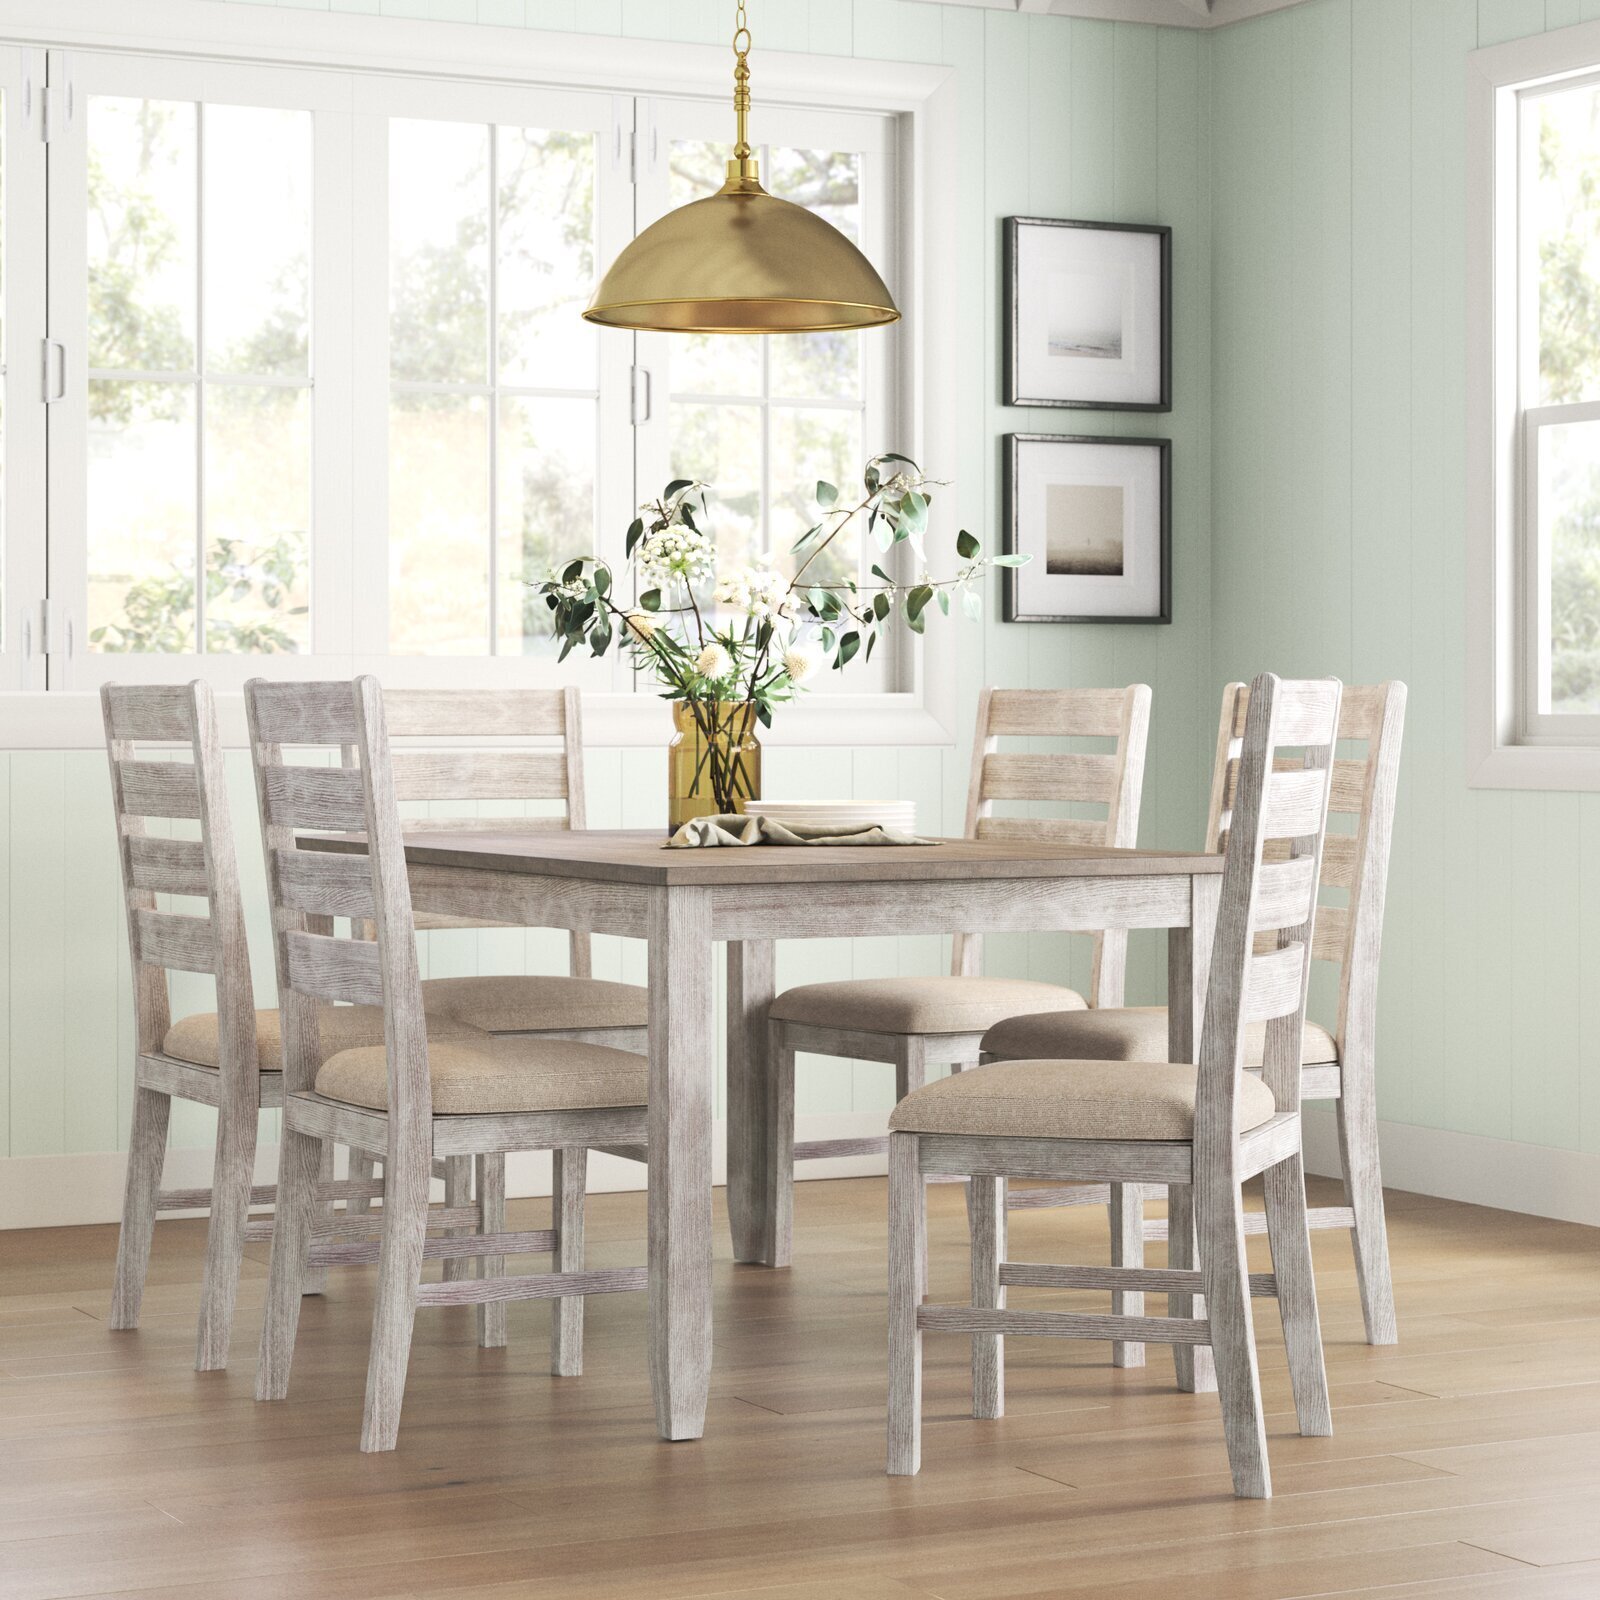 Distressed Farmhouse Table and Chairs